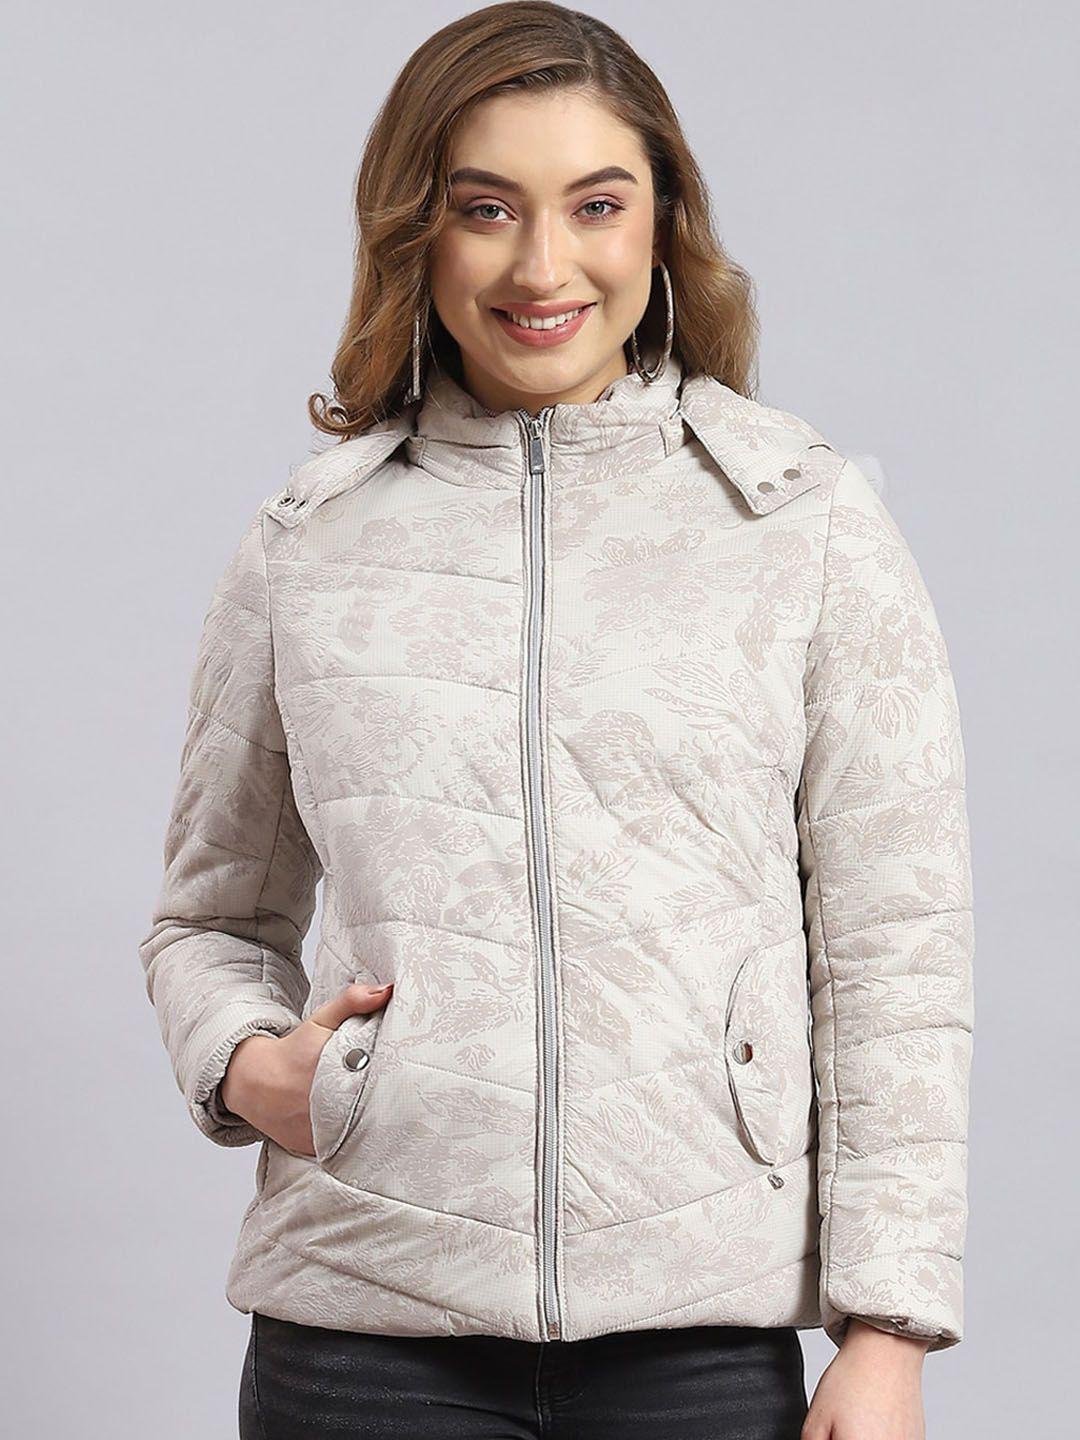 Monte Carlo Floral Printed Hooded Lightweight Puffer Jacket